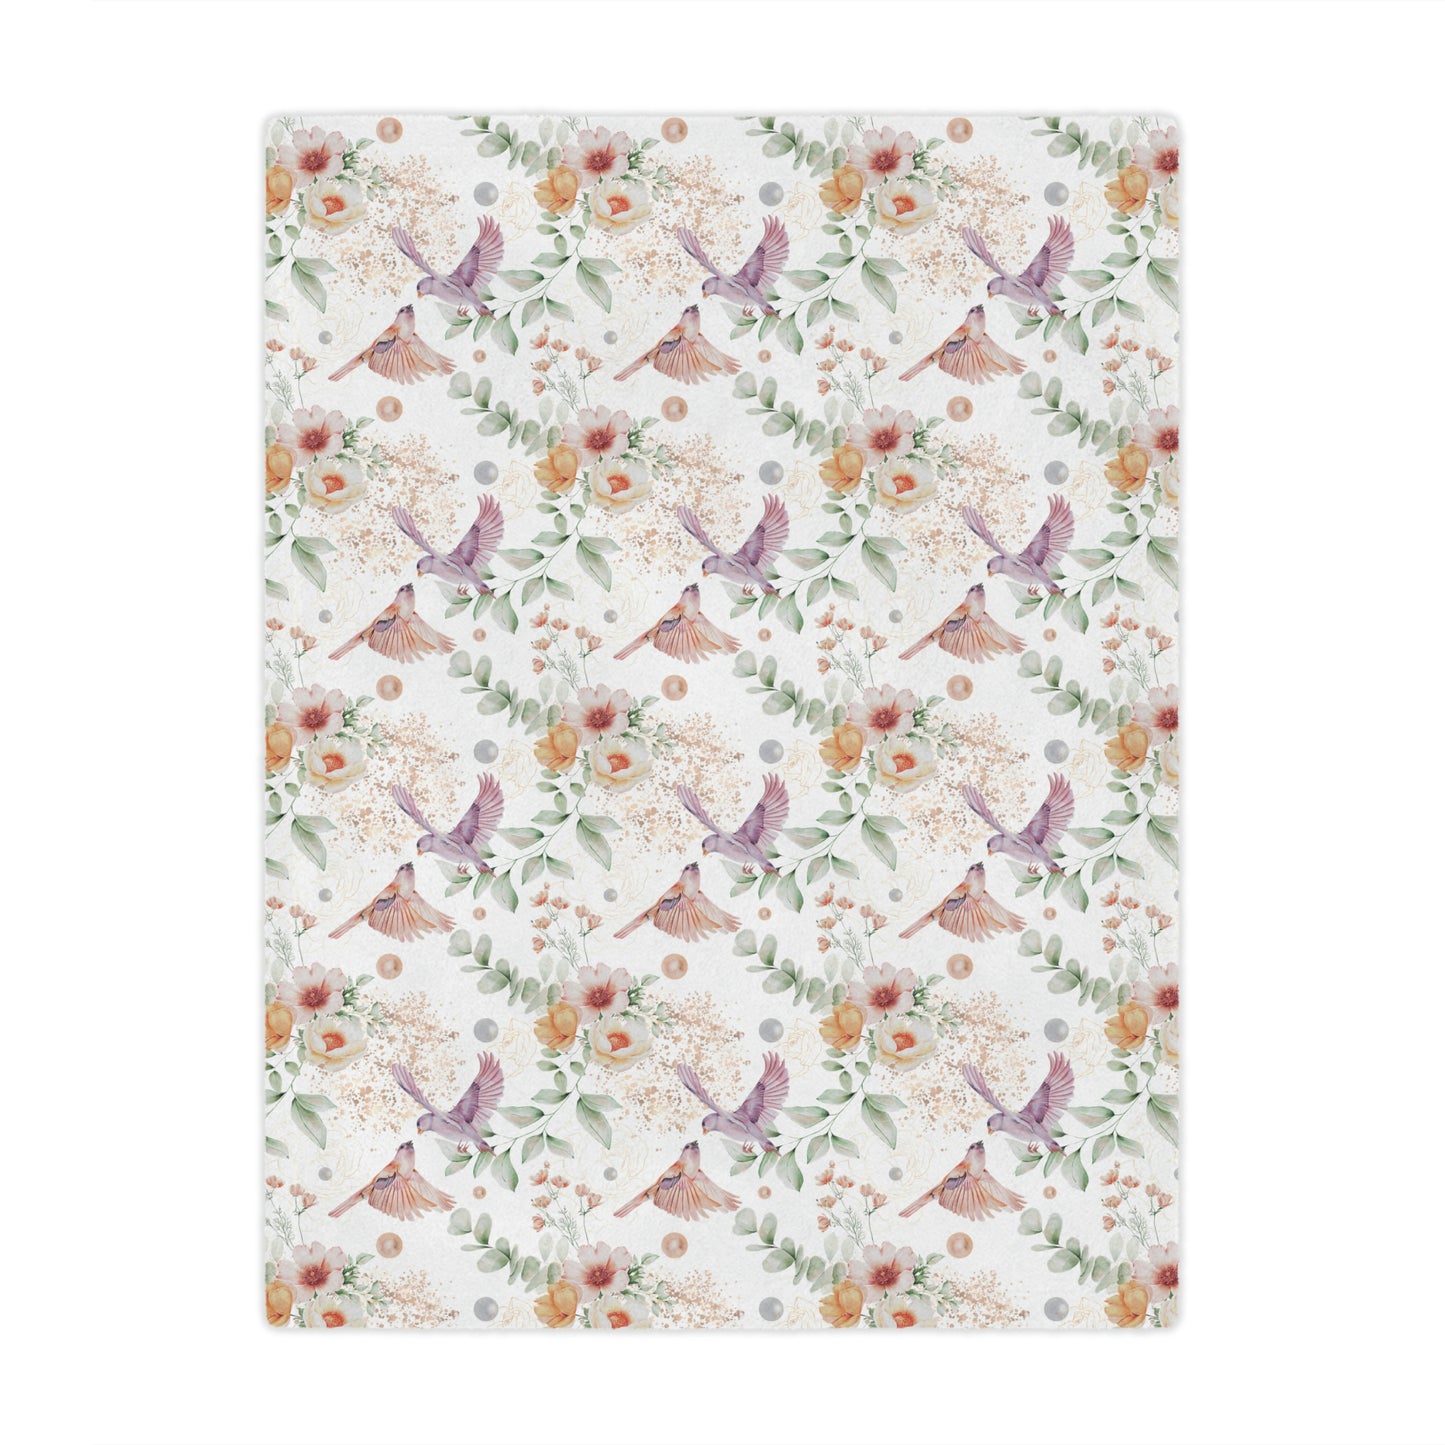 floral blanket with birds lying on a bed, floral throw blanket decorating a bed or couch, floral accent blanket